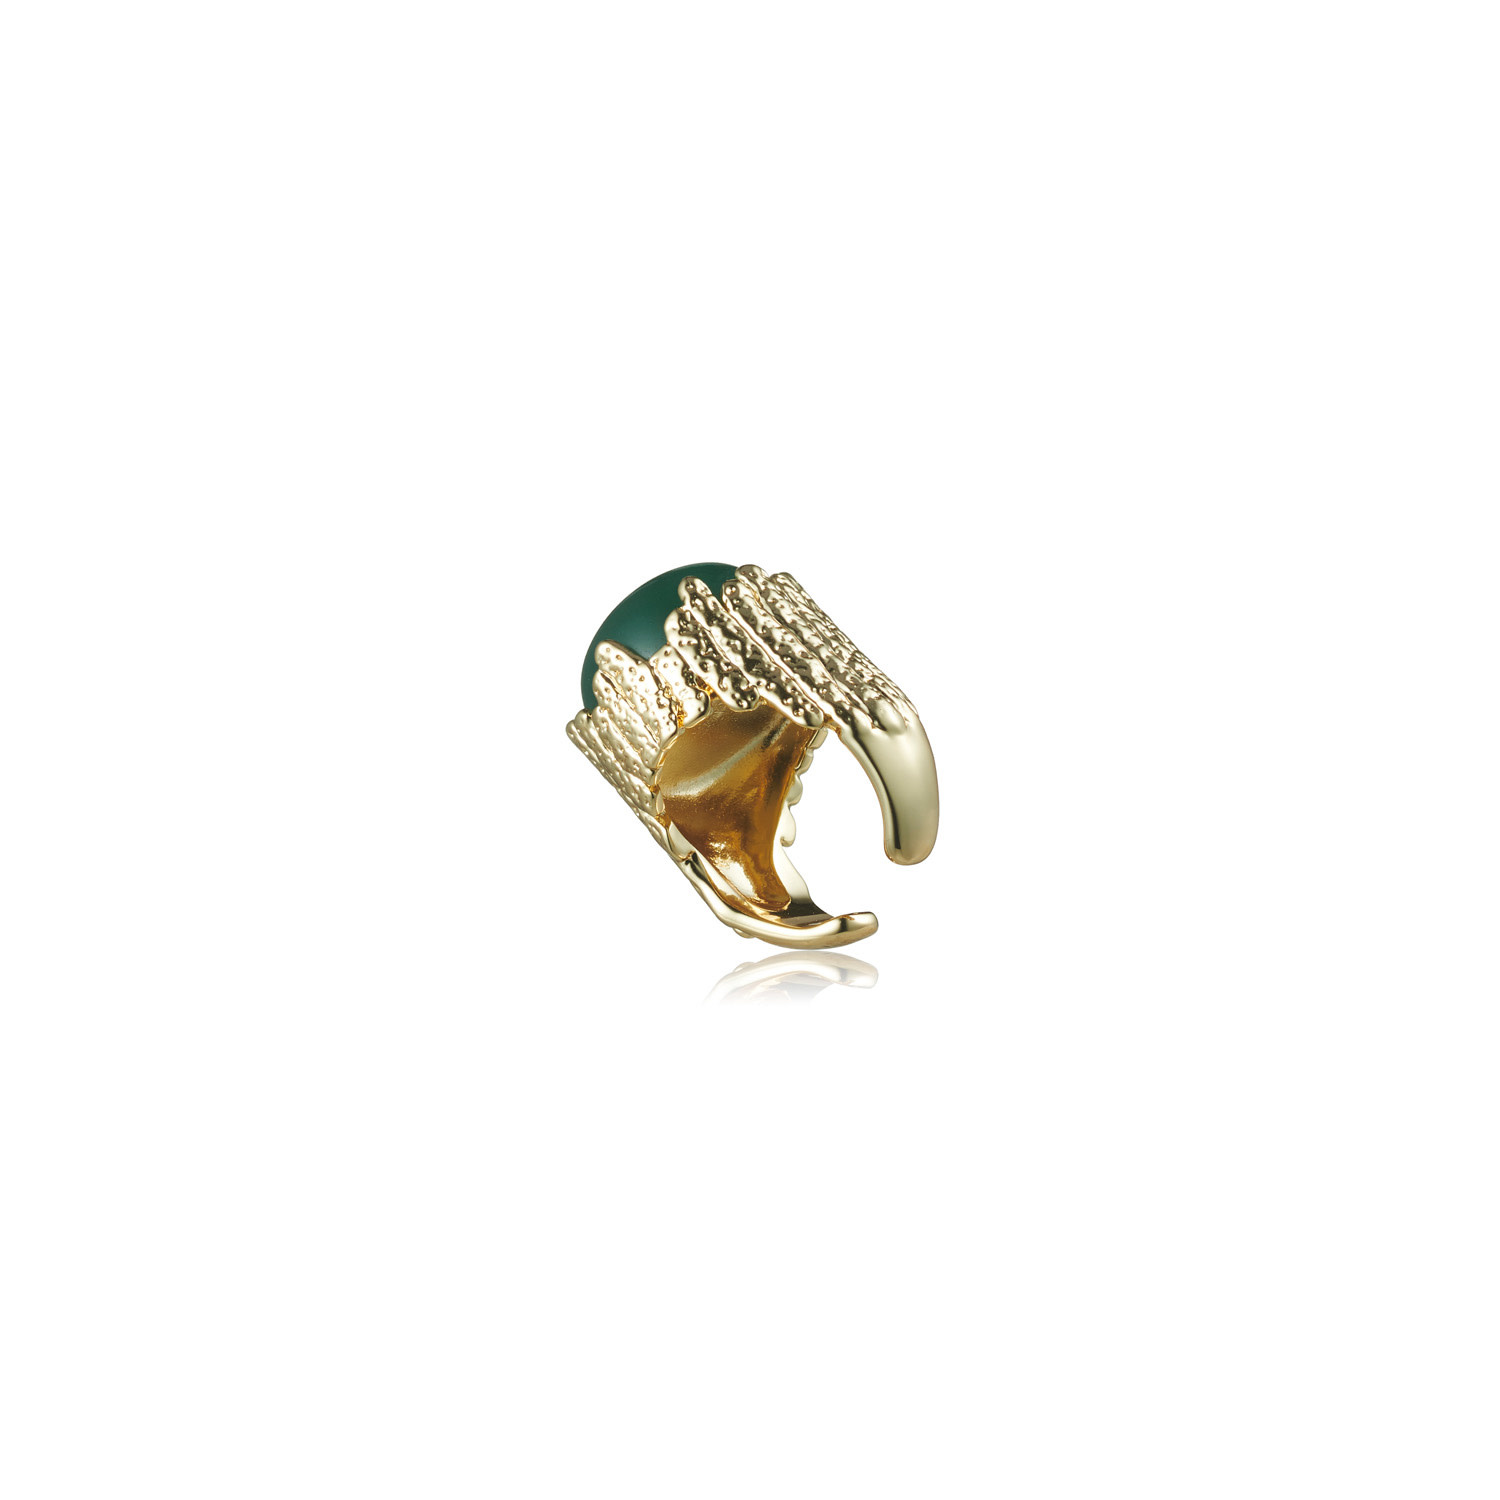 Jupiter Ring - Brut Baum Collection - 14ct Gold Plated Ring with Cabochon Green Agate  - Sarina Suriano for BECKER MINTY-3